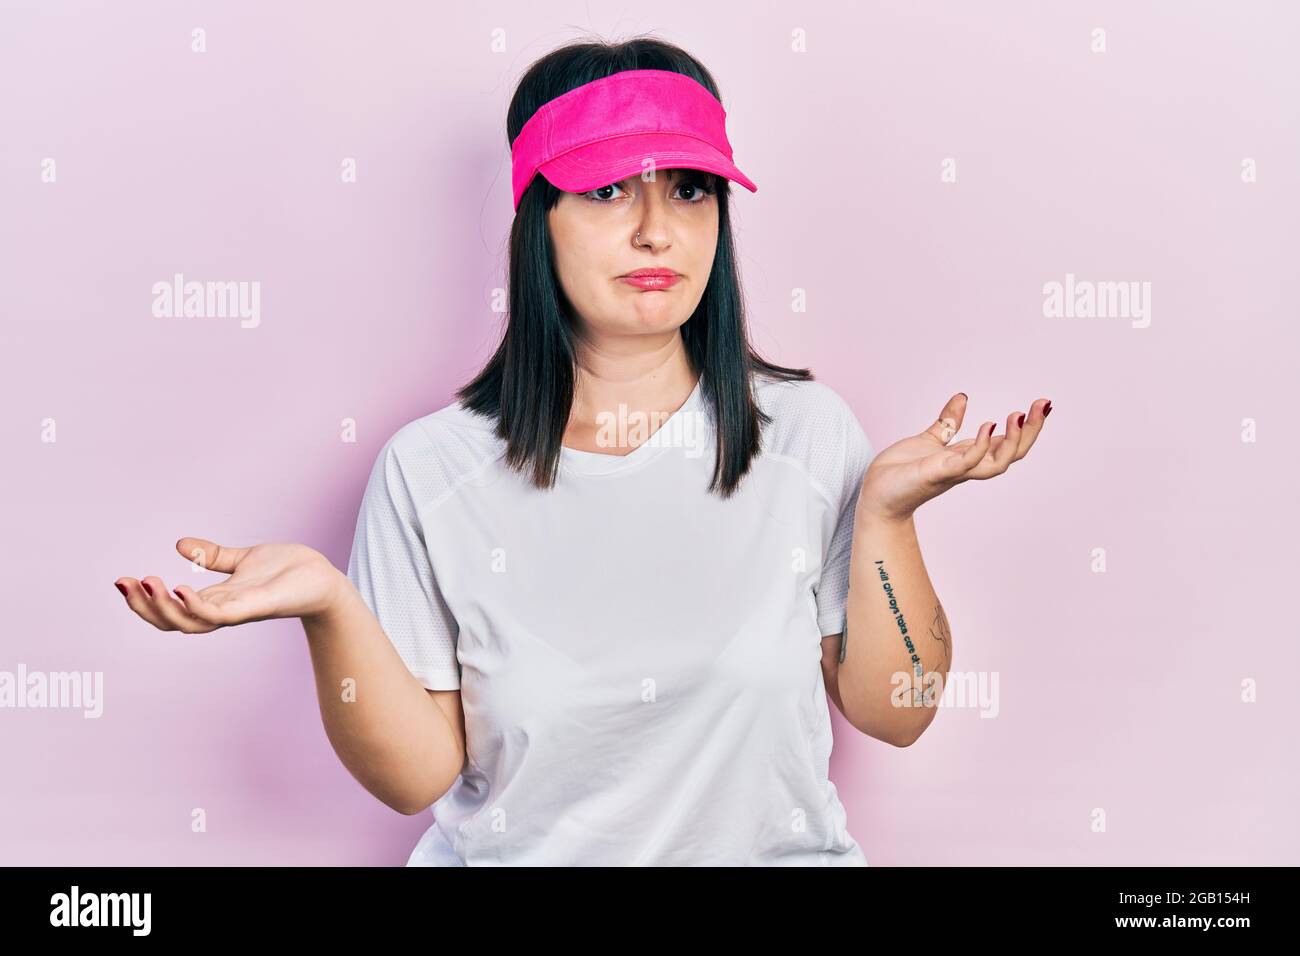 Young hispanic woman wearing sportswear and sun visor cap clueless and confused expression with arms and hands raised. doubt concept. Stock Photo